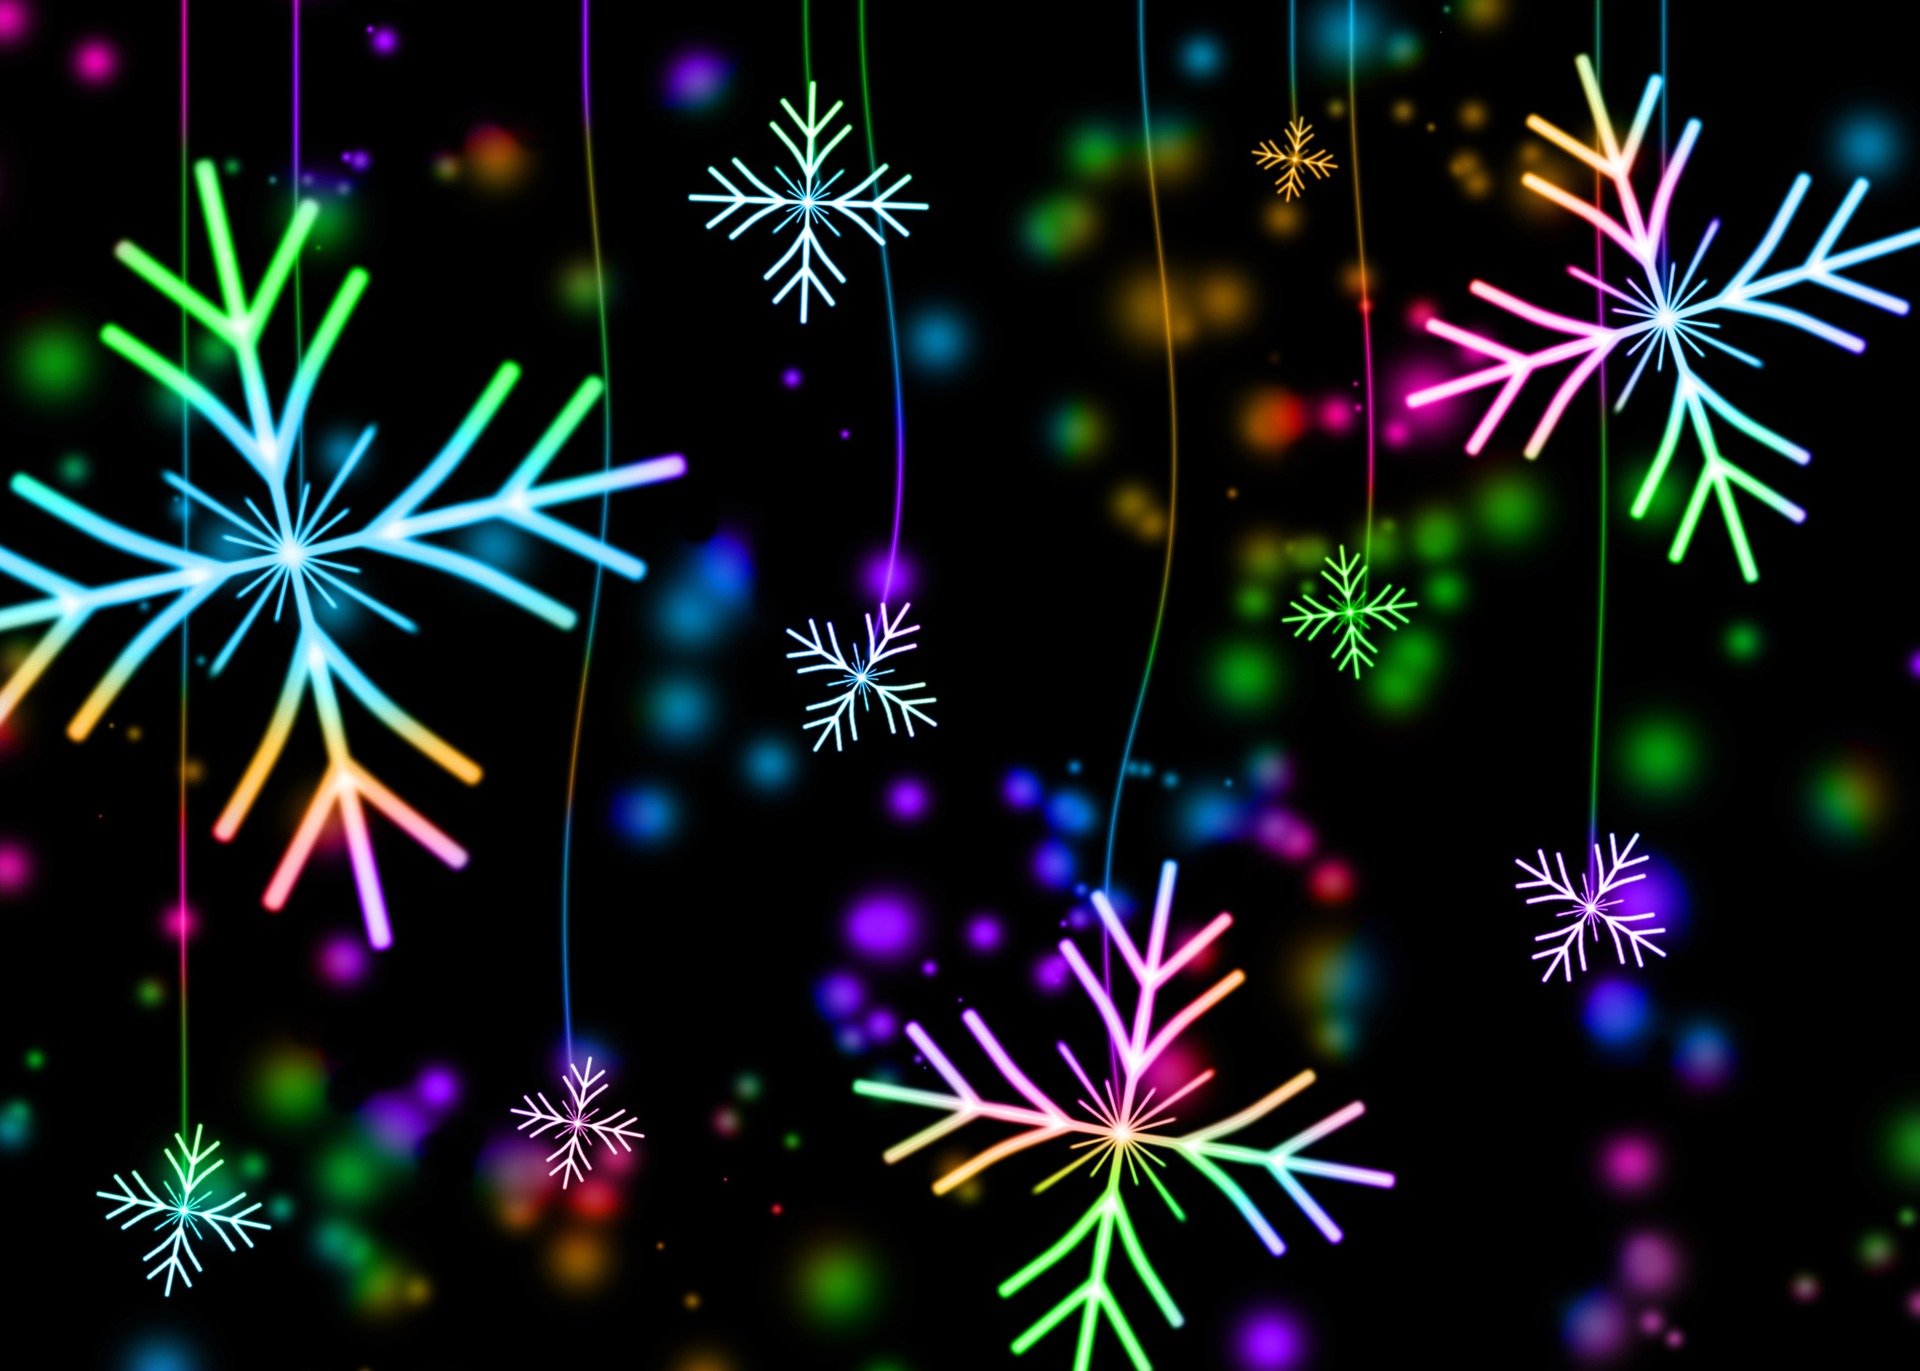 colorful snowflakes